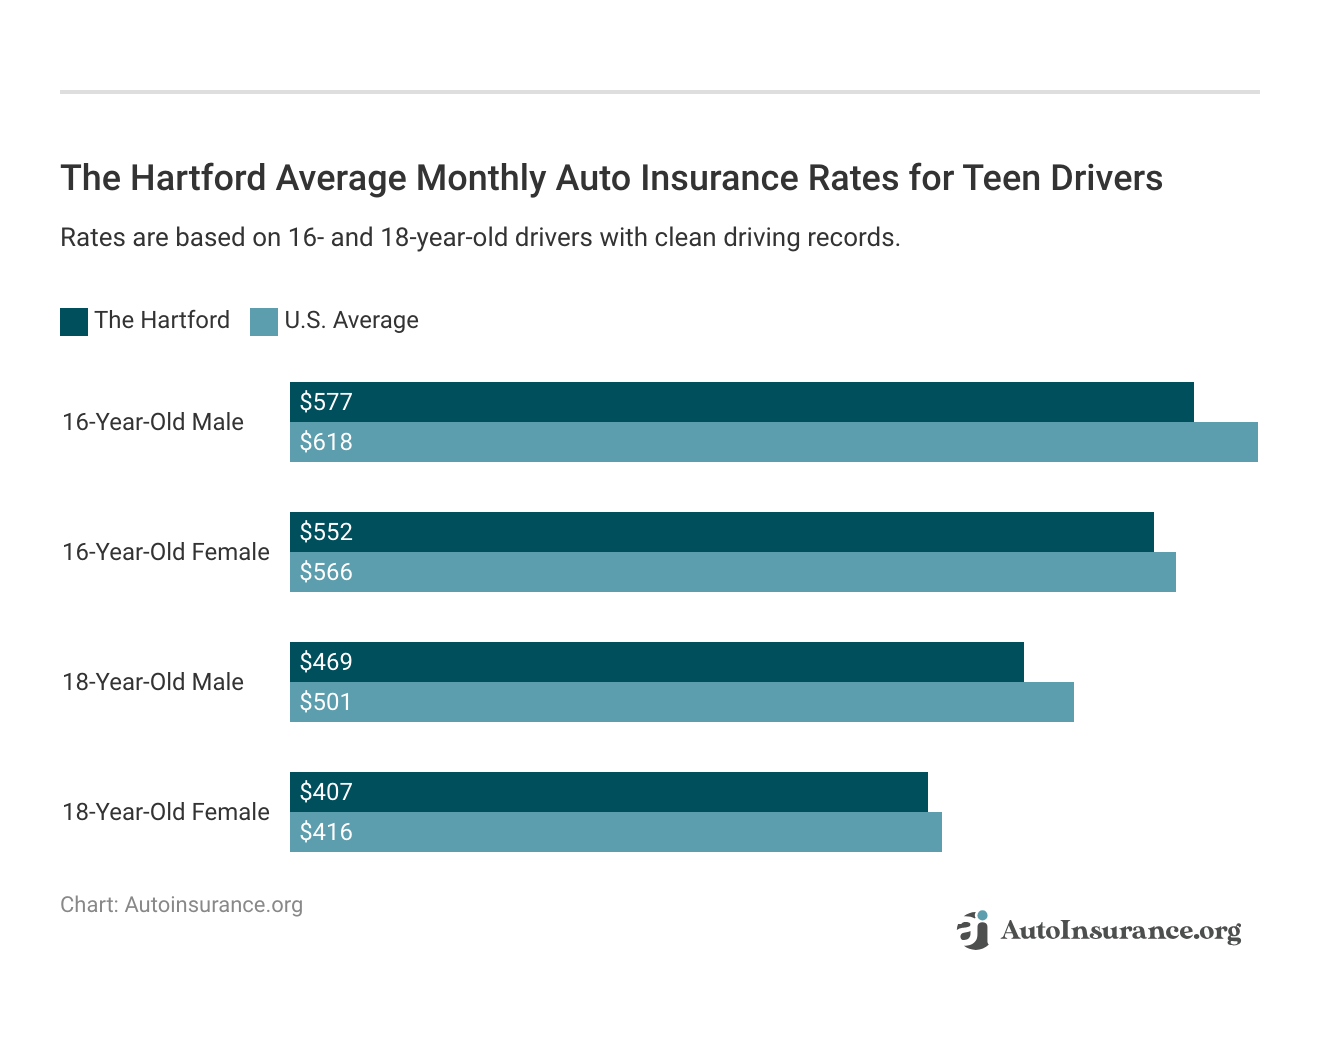 <h3>The Hartford Average Monthly Auto Insurance Rates for Teen Drivers</h3>